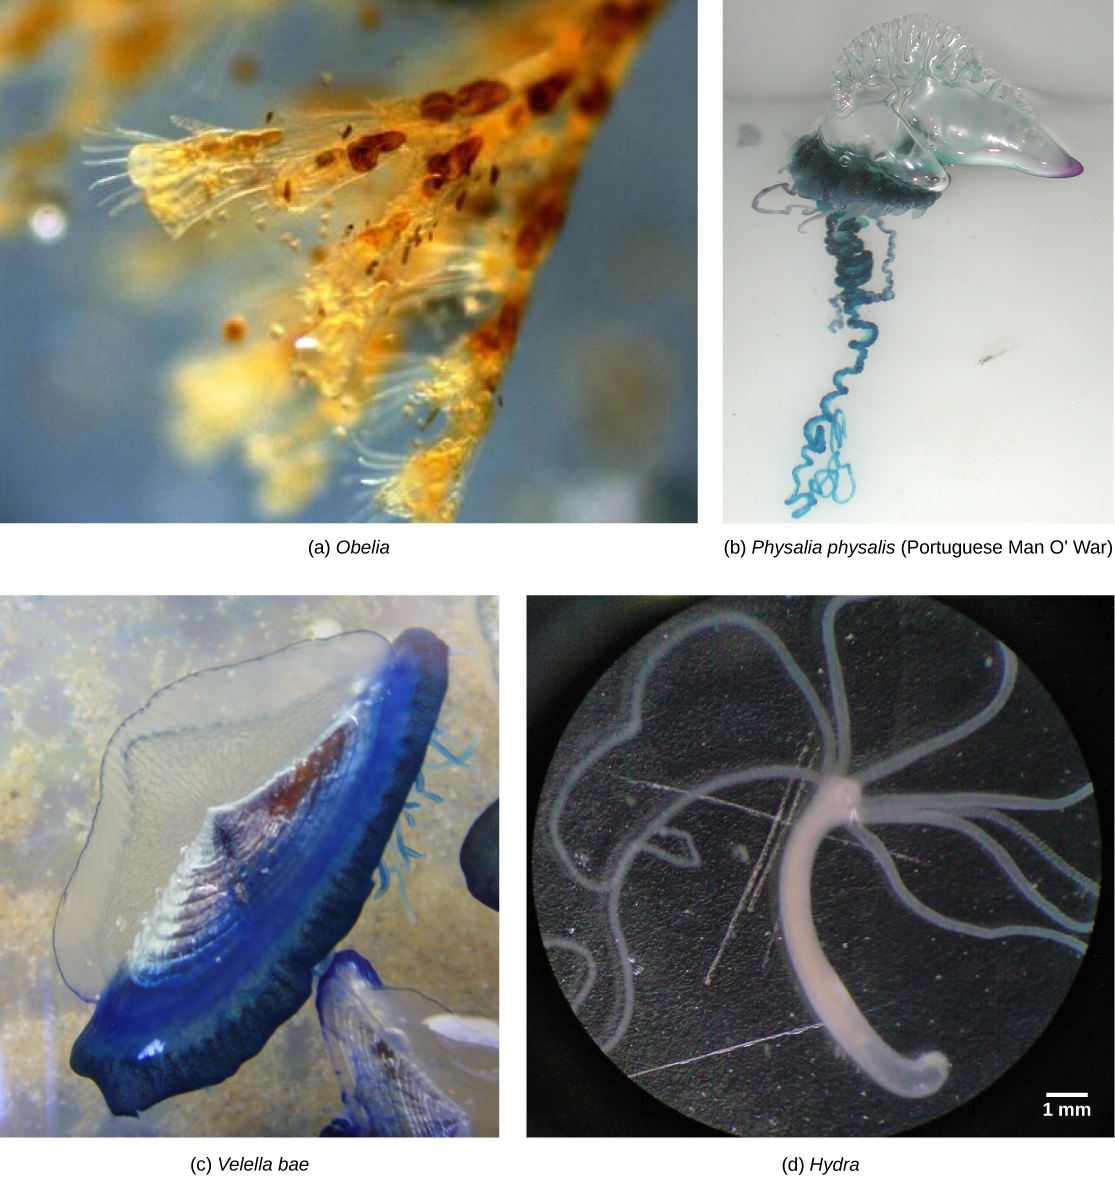 Photo a shows Obelia, which has a body composed of branching polyps. Photo b shows a Portuguese Man O War, which has ribbon-like tentacles dangling from a clear, bulbous structure, resembling an inflated plastic bag. Photo c shows Velella bae, which resembles a flying saucer with a blue bottom and a clear, dome-shaped top. Photo d shows a hydra with long tentacles, extending from a tube-shaped body.